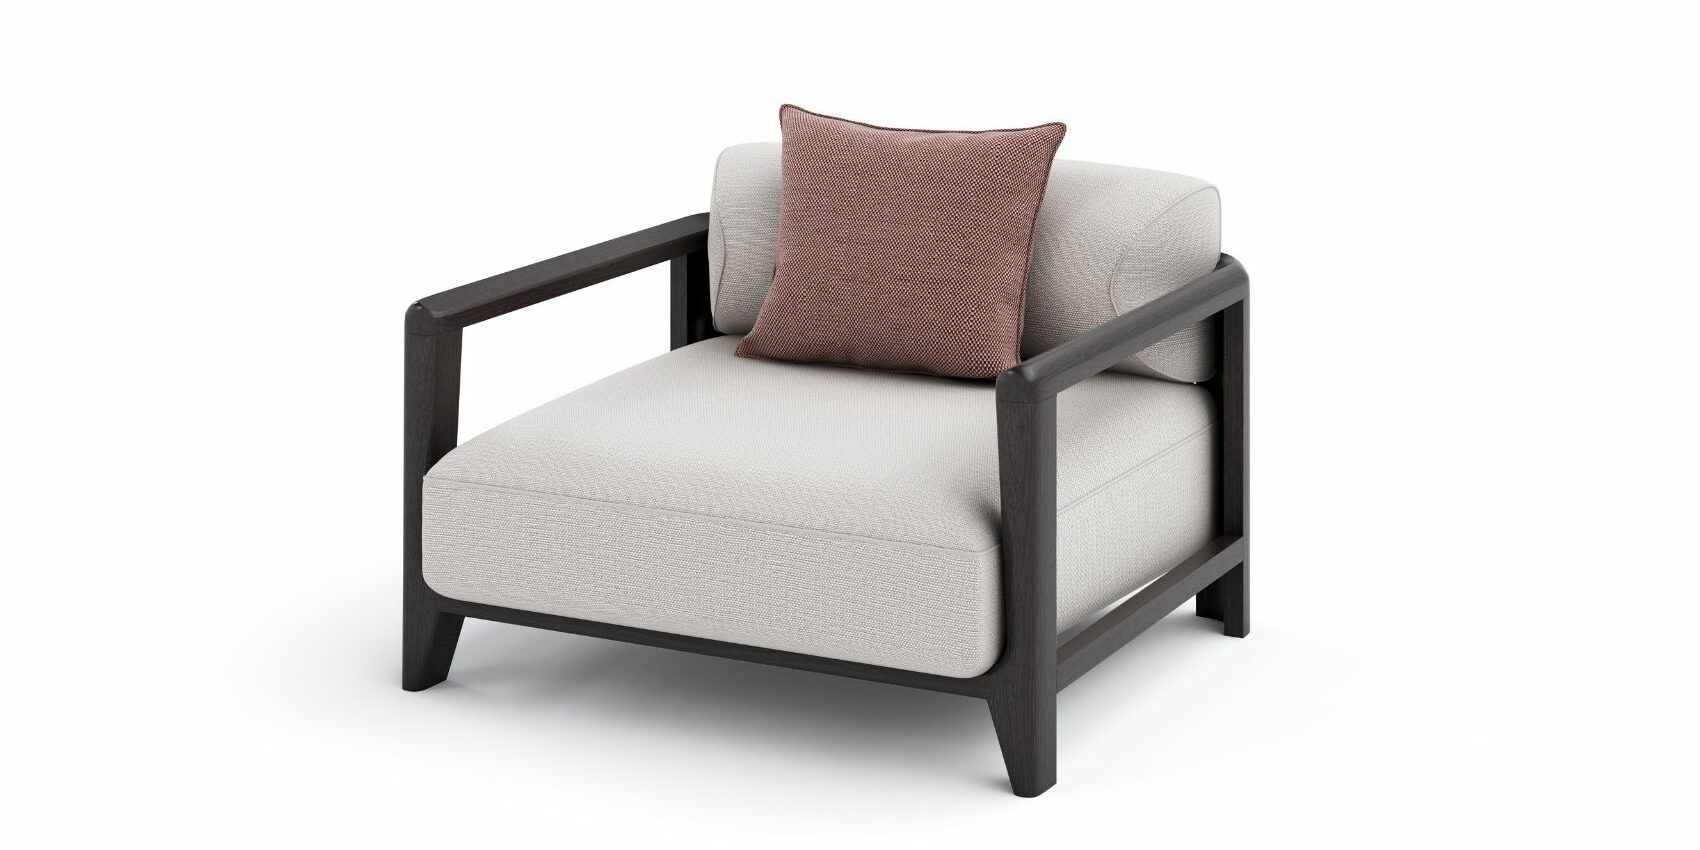 Tamarindo Lounger With Table in Outdoor Loungers for Tamarindo collection